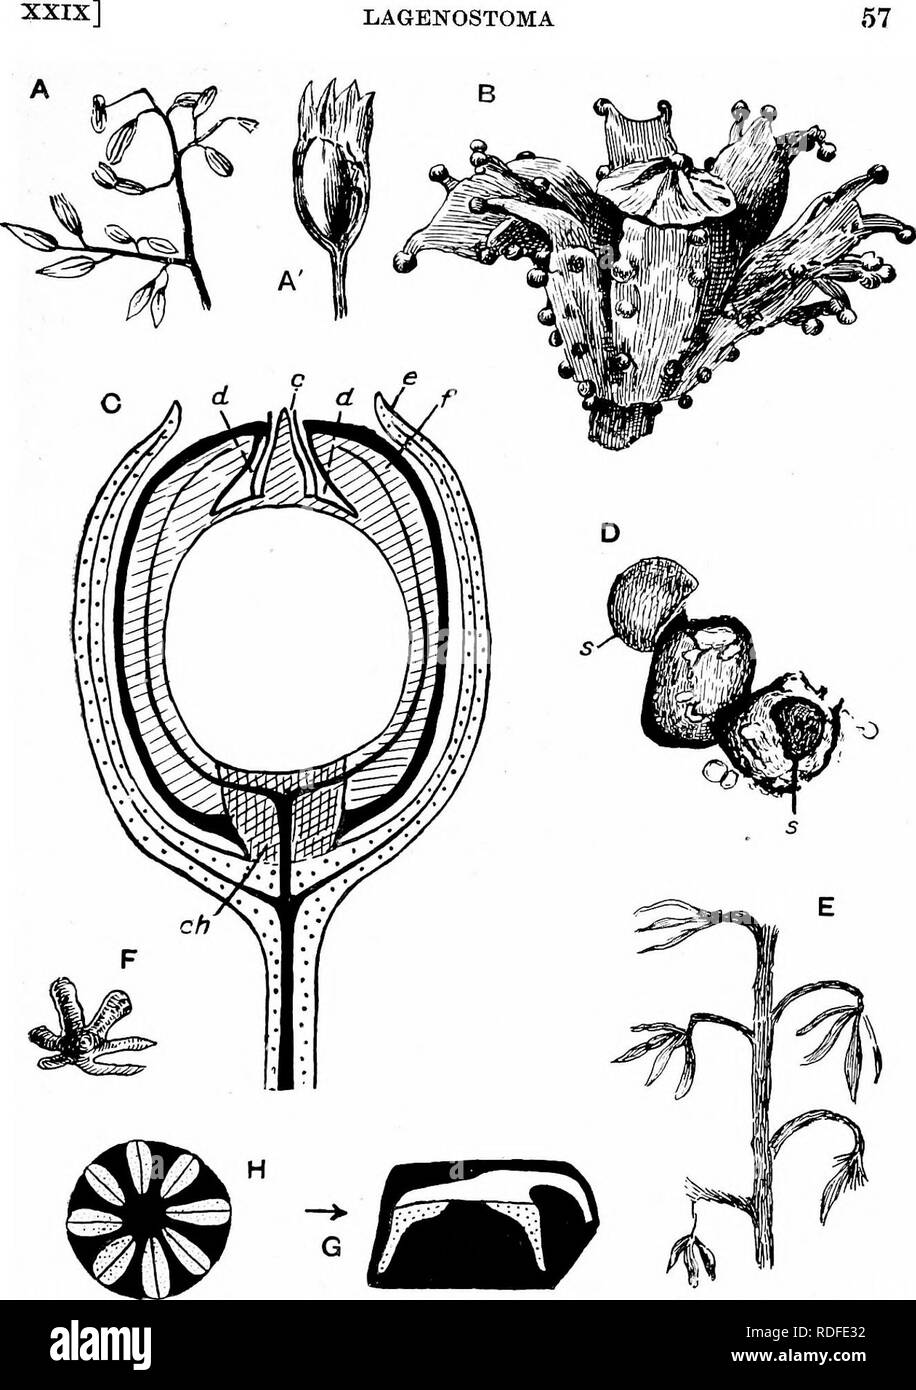 . Fossil plants : for students of botany and geology . Paleobotany. Fig. 408. A, A', Lagenospermiim Sinclairi. B, Lagenostoma, restoration. C, Lage- nostoma Lomaxi; c, mioropyle; d, space between integument and nuoellus; e, oupule; /, integument; ch, chalaza. D, microspores of Lagenostoma ovoides. E, F, Calymmatotheca Stangeri. G, H, Crossotheca Hoetiinghausi. H, section of G in line of arrow. (A, after Arber; B, C, E, F, after Oliver; D, after Benson; G, H, after Kidston.). Please note that these images are extracted from scanned page images that may have been digitally enhanced for readabili Stock Photo